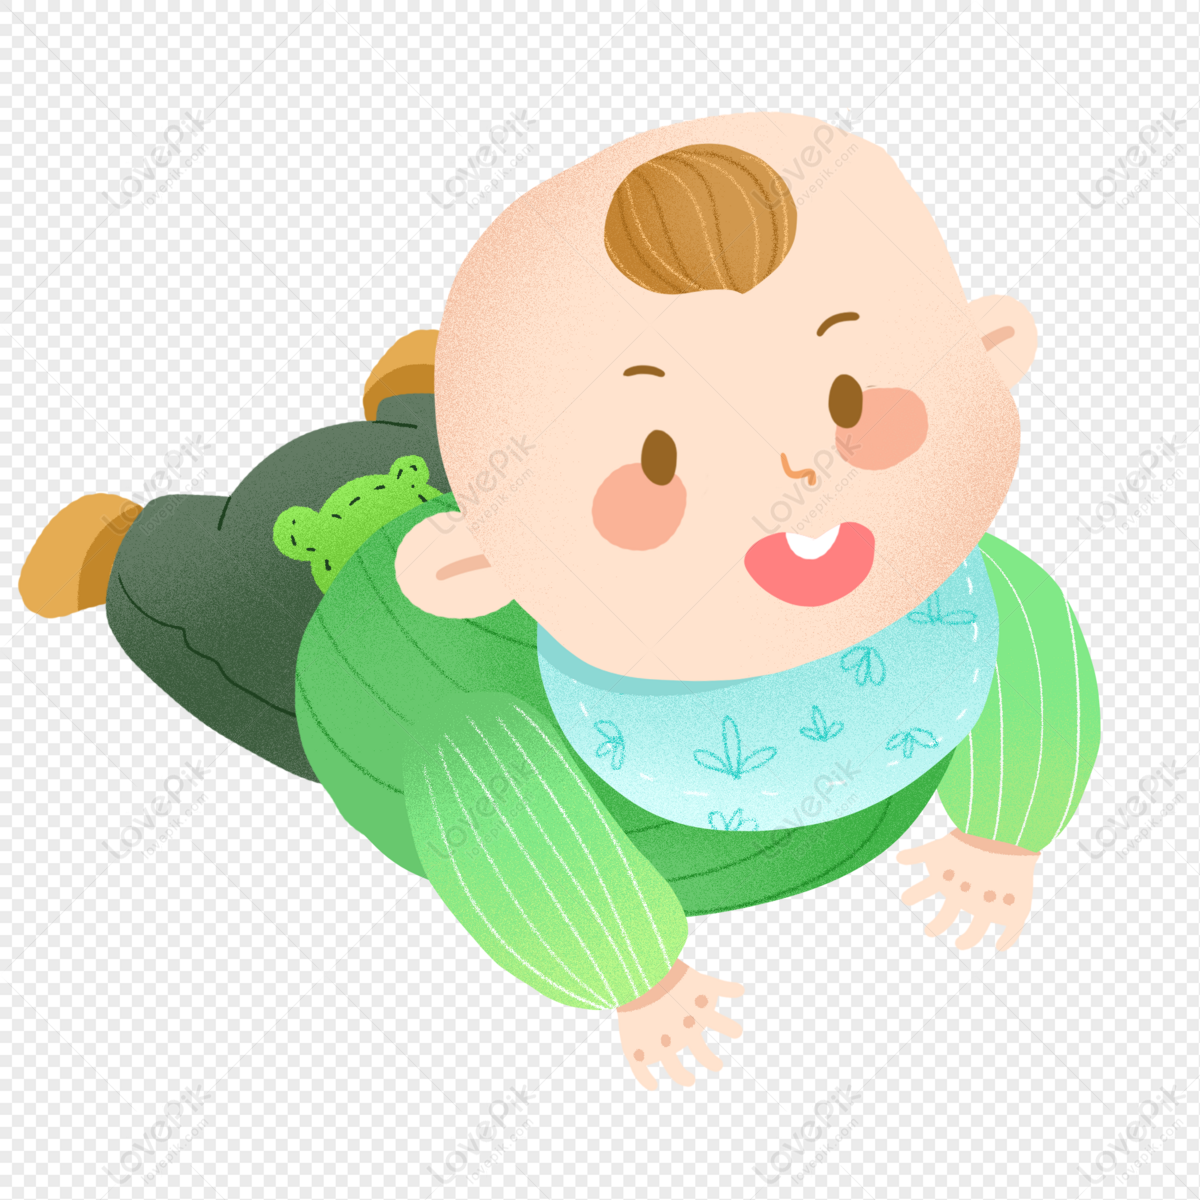 Little Baby Crawling On The Ground PNG Images With Transparent ...